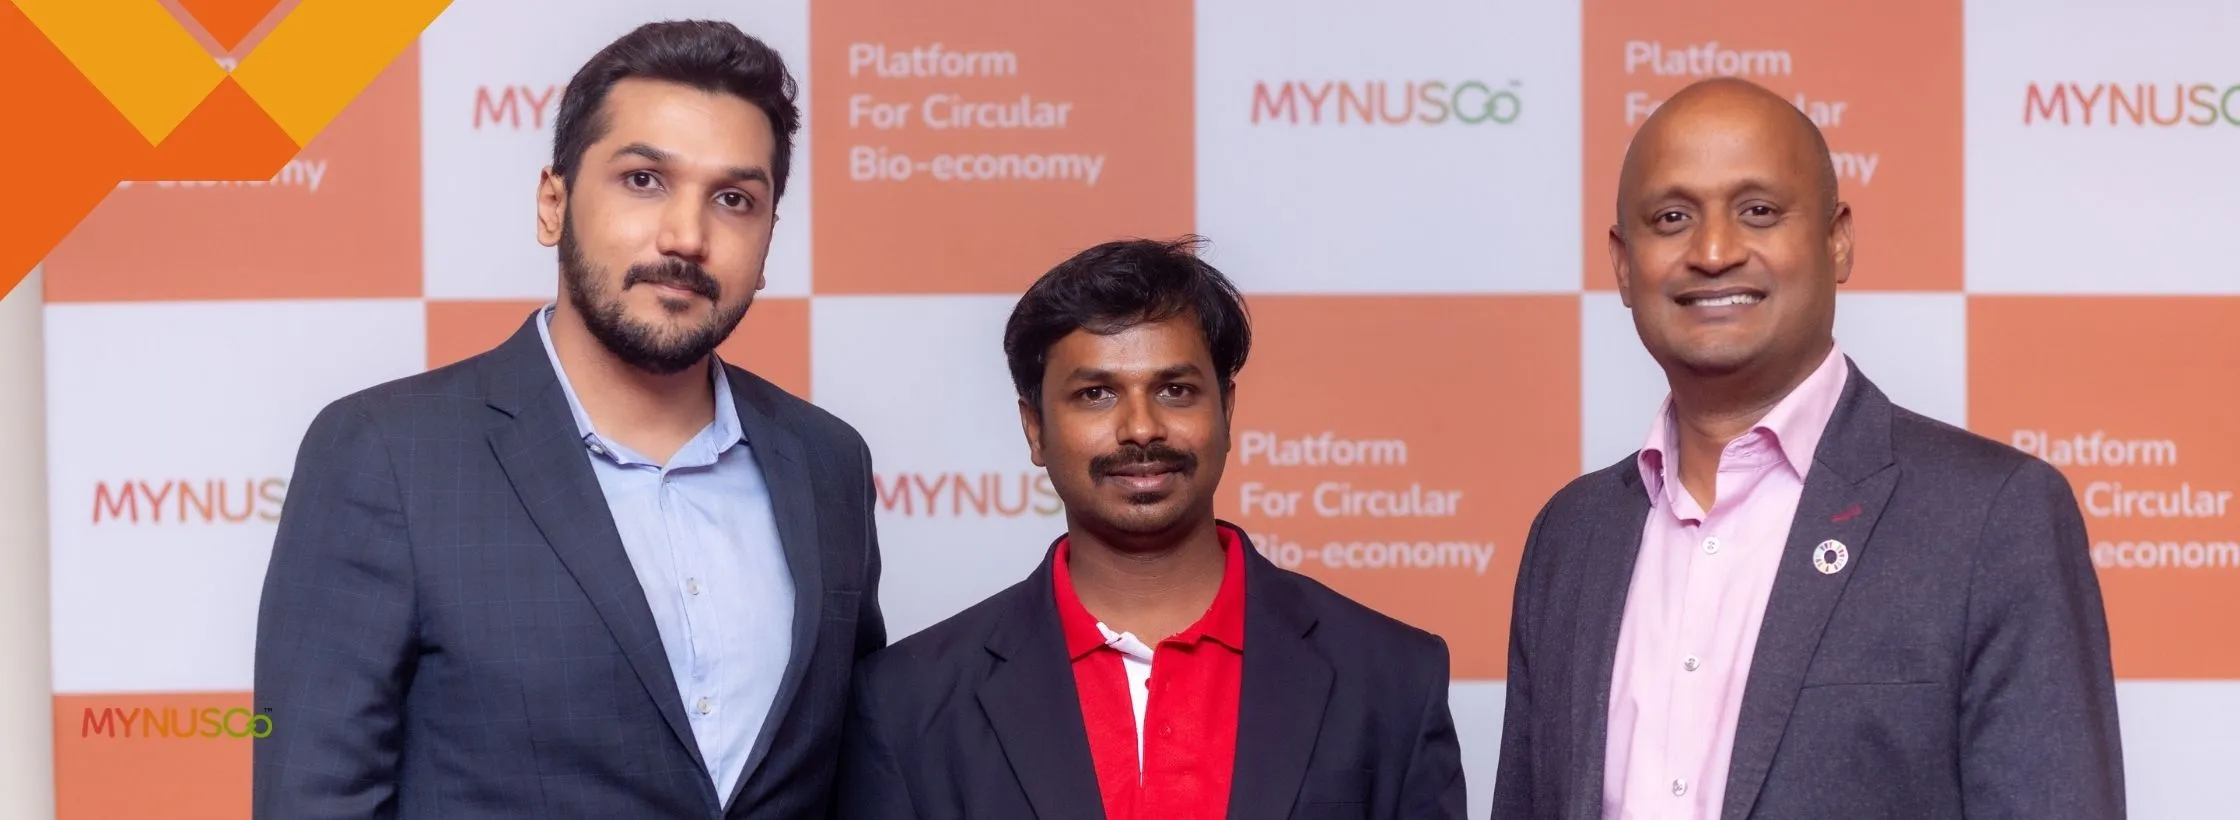 Biomaterials platform Mynusco to fight climate change | By The Economic Times